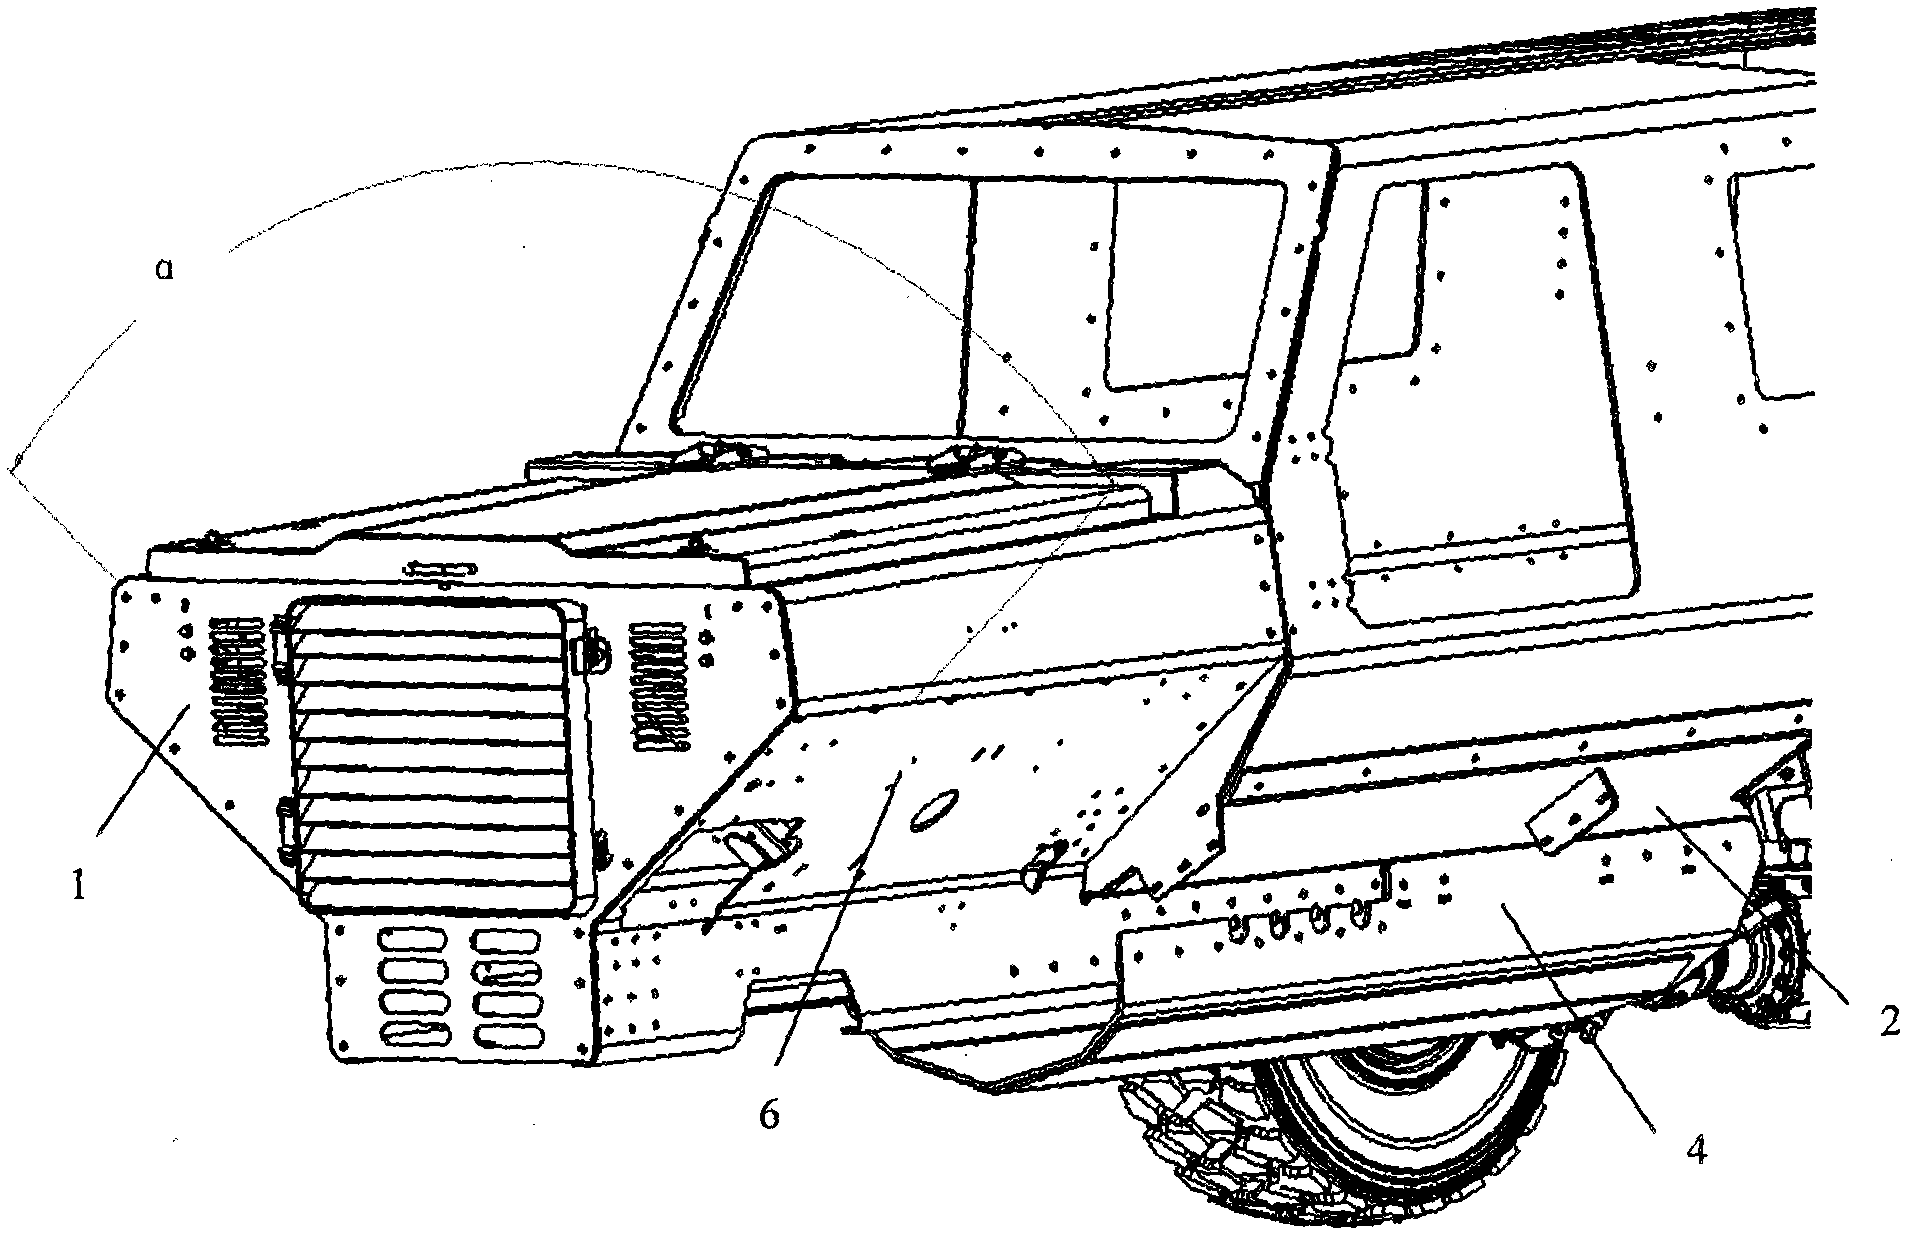 Anti-mine composite structure armored vehicle for carrying out multi-angle shunting on detonation waves